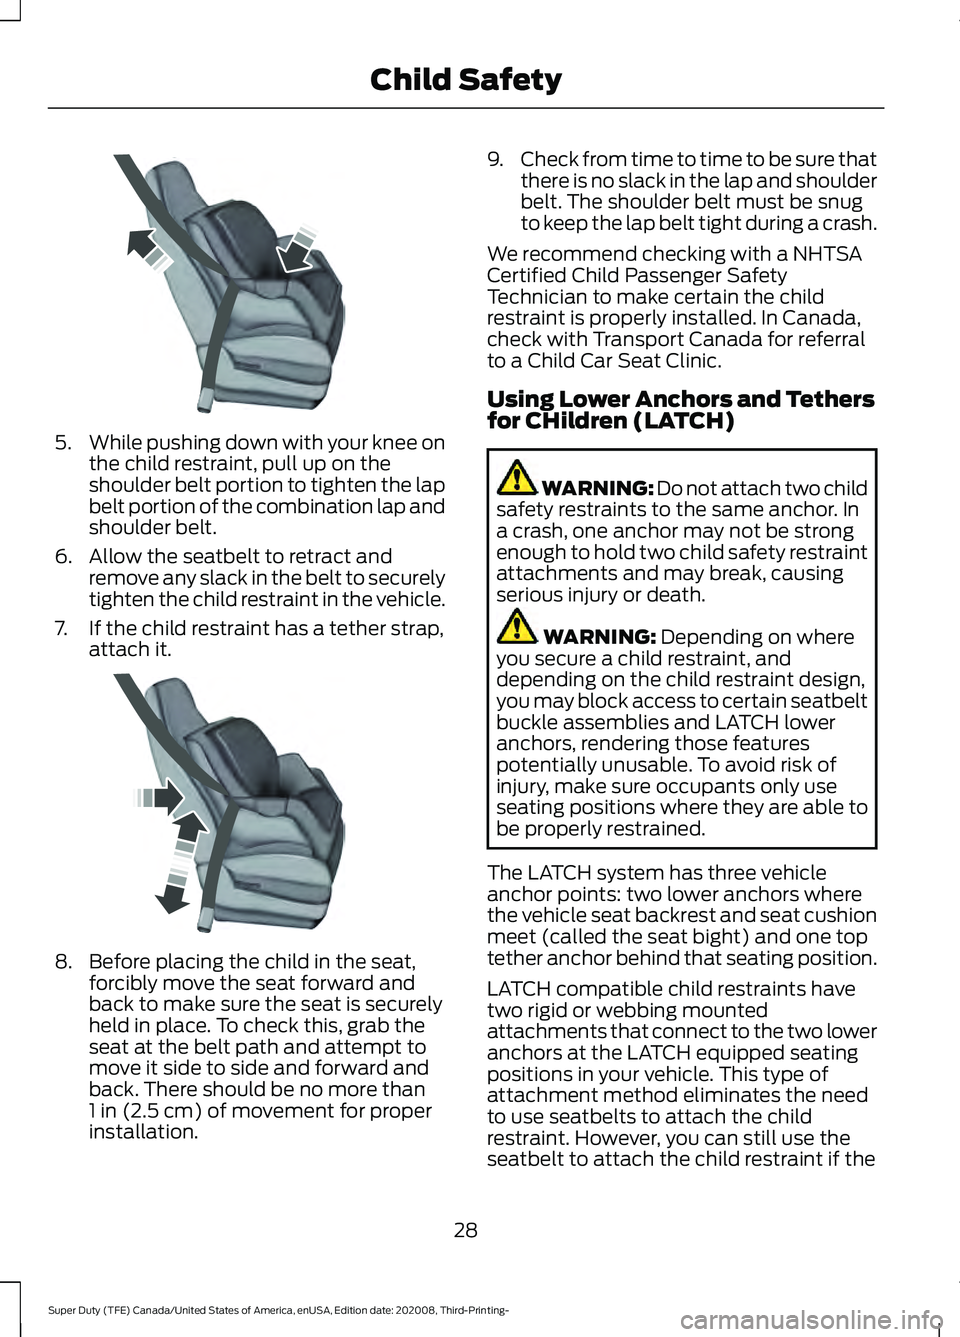 FORD F-450 2021 Owners Guide 5.
While pushing down with your knee on
the child restraint, pull up on the
shoulder belt portion to tighten the lap
belt portion of the combination lap and
shoulder belt.
6. Allow the seatbelt to ret